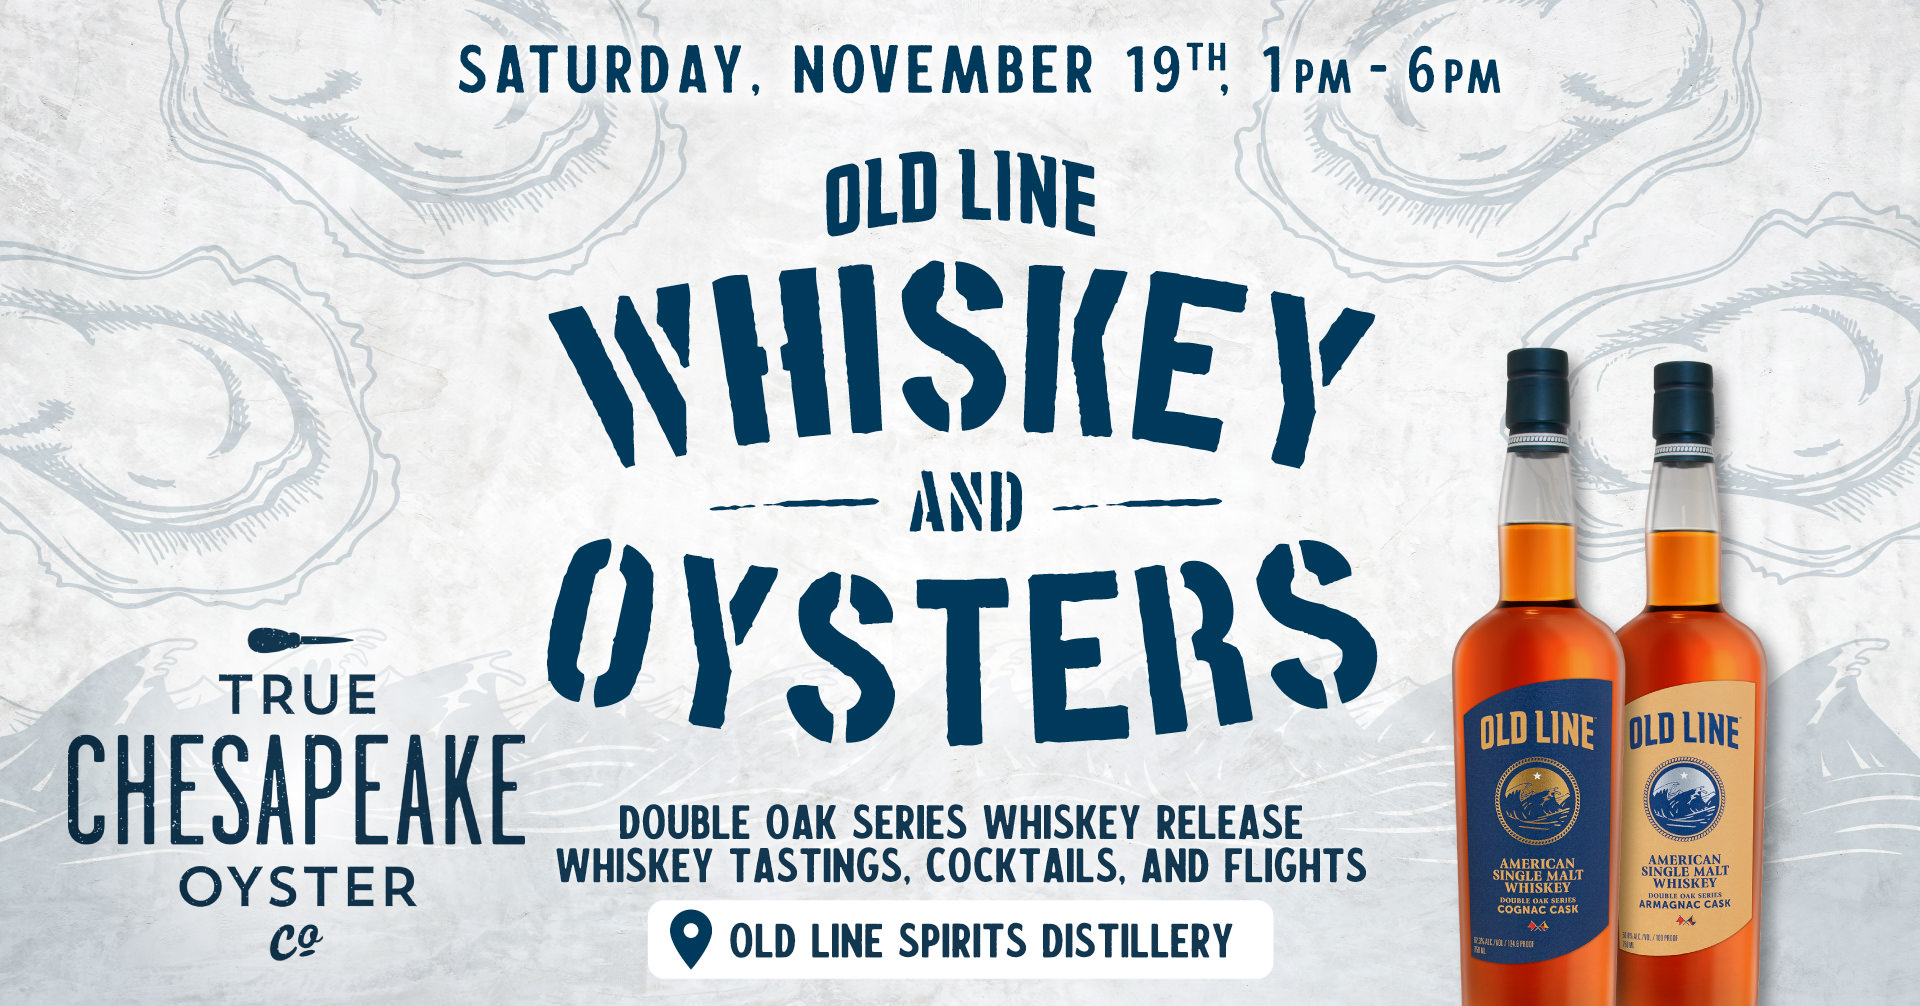 Old Line Whiskey And Oysters Facebook Event